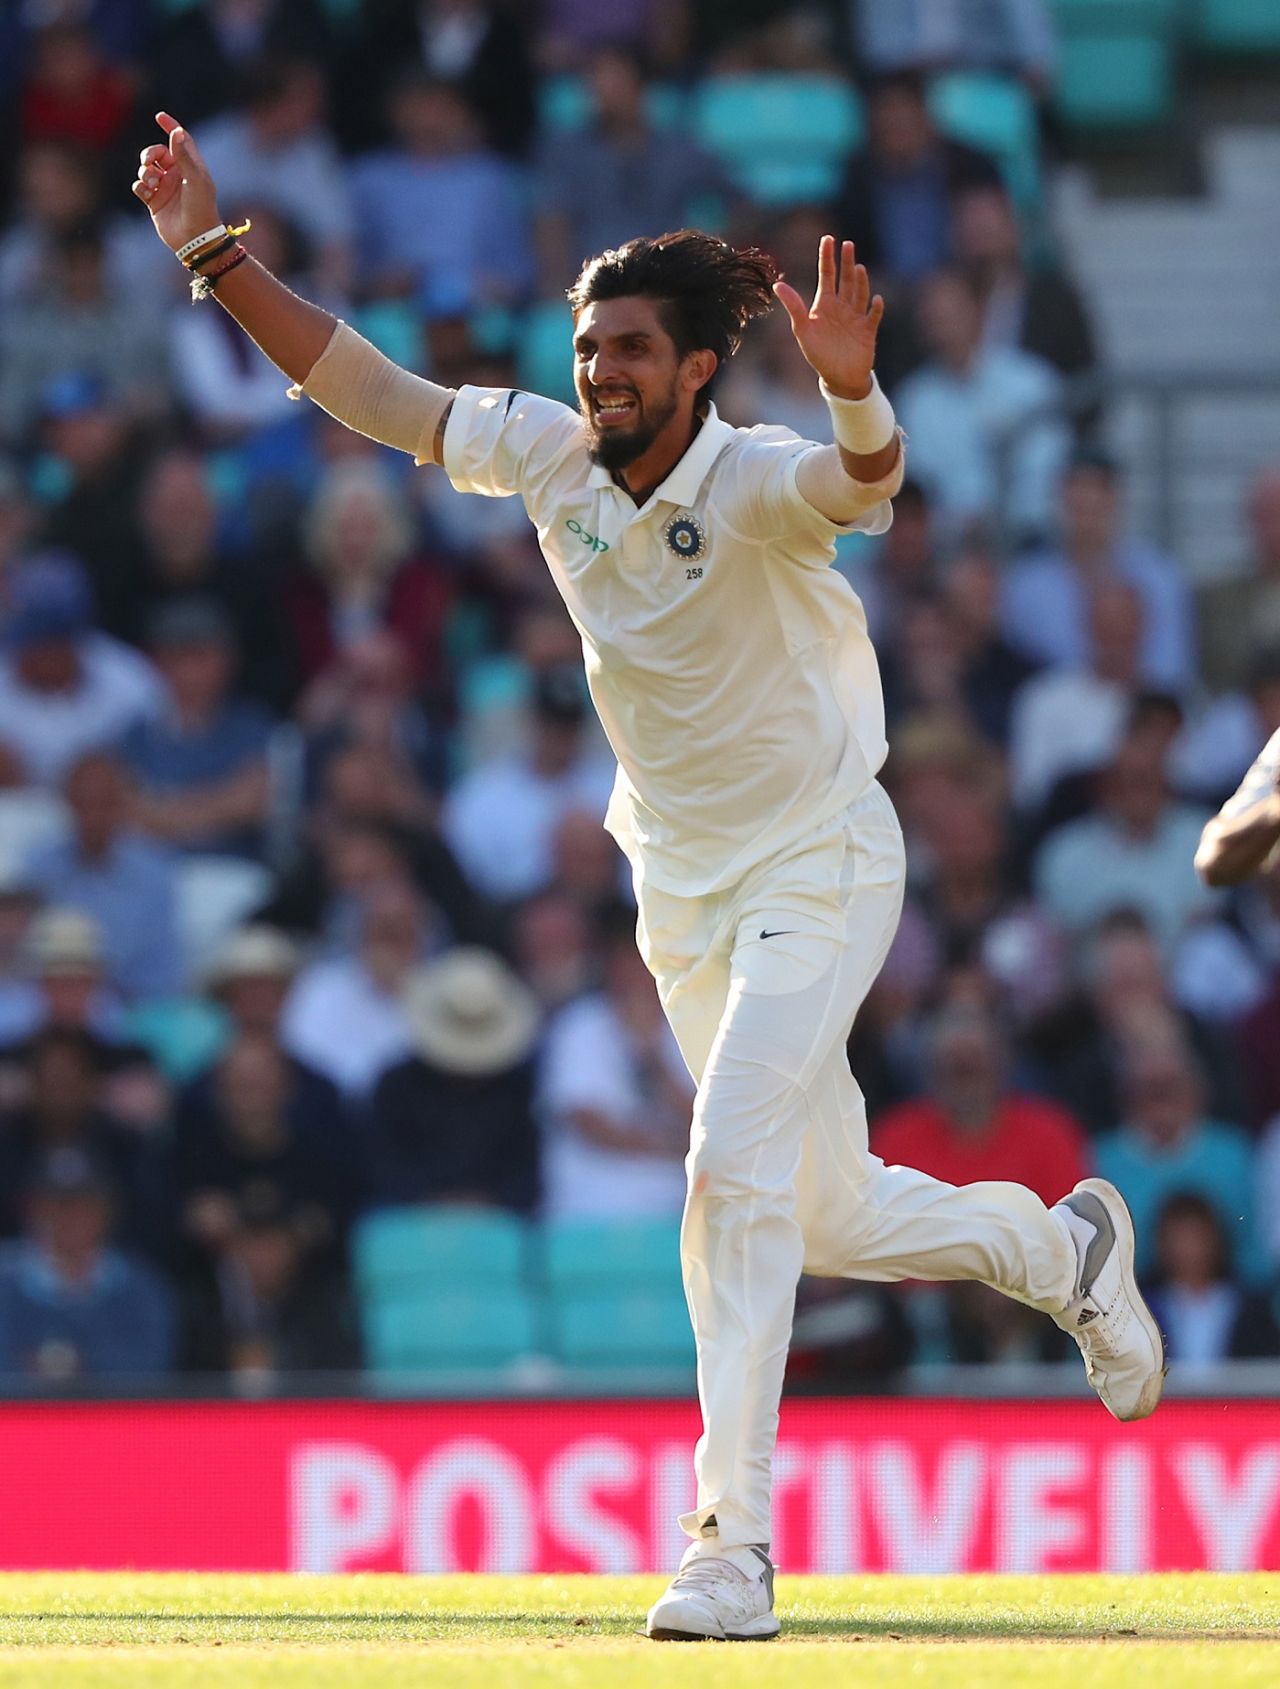 Ishant Sharma takes off, England v India, 5th Test, The Oval, 1st day, September 7, 2018